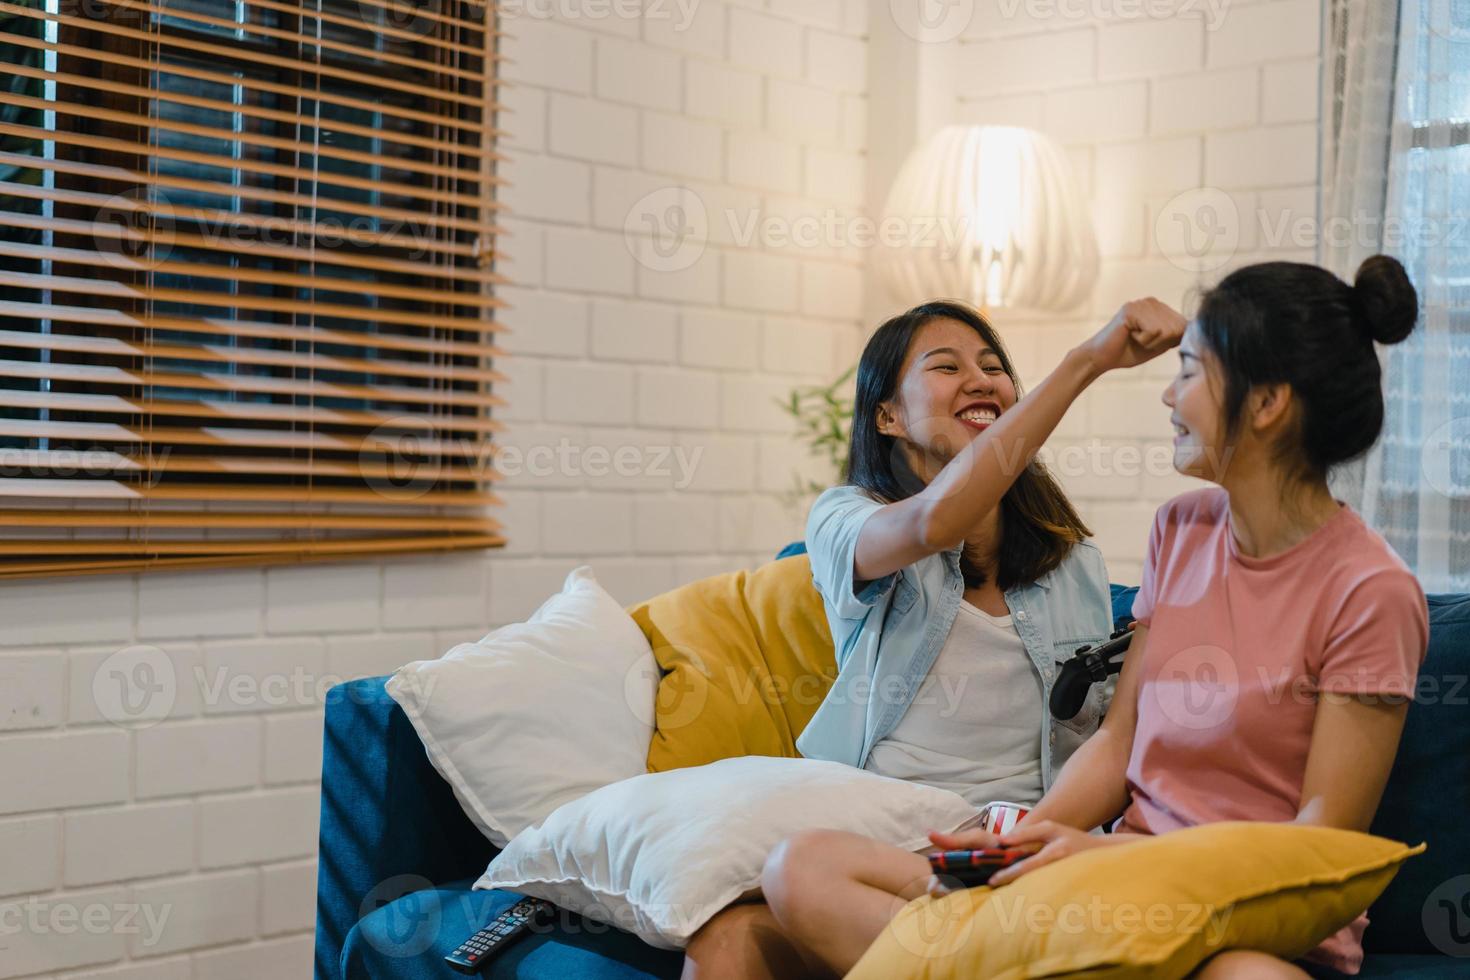 Lesbian lgbt women couple play games at home, Asian female using joystick having funny happy moment together on sofa in living room in night. Young lover football fan, celebrate holiday concept. photo